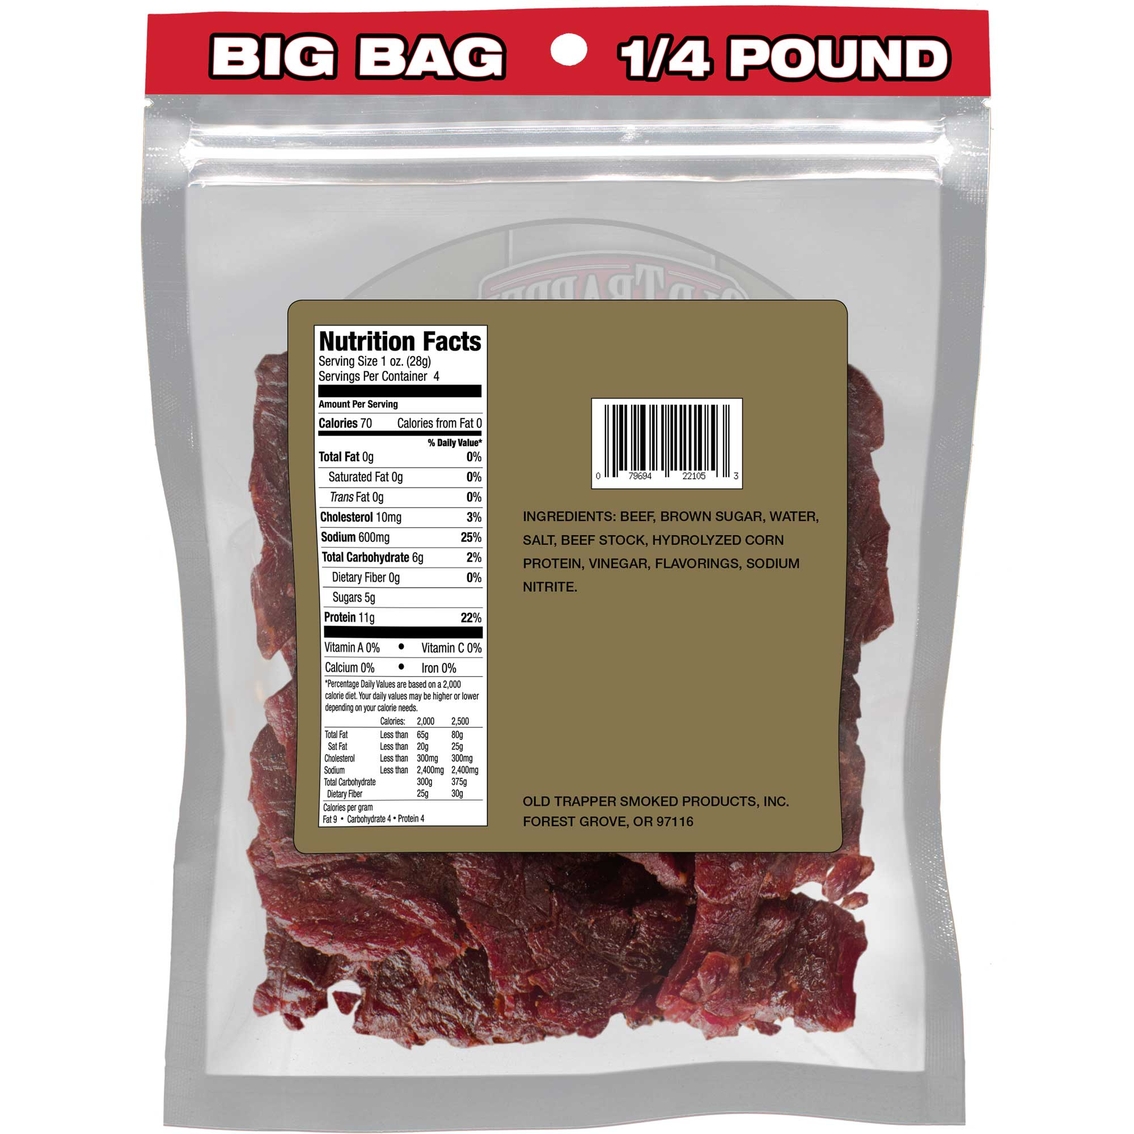 Old Trapper Old Fashioned Beef Jerky 4 oz. - Image 2 of 2